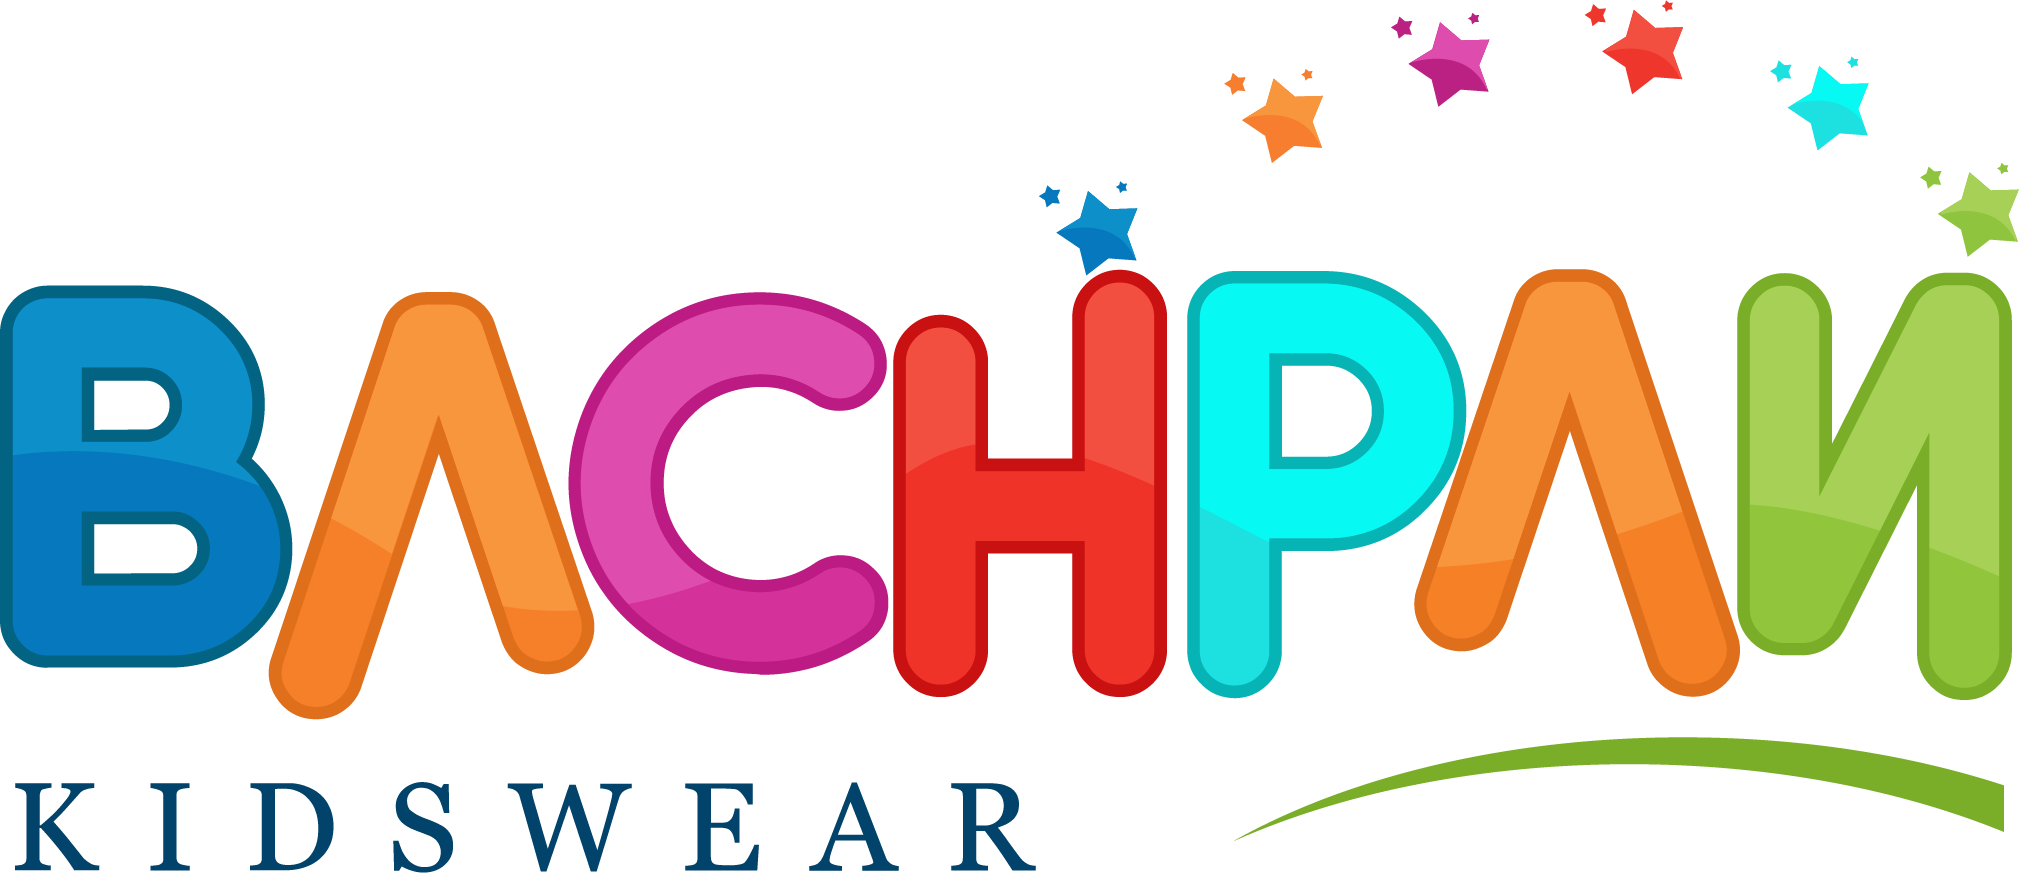 Bachpan Play School Celebrates 20 Years of Excellence in Early Childhood  Education - Business Micro